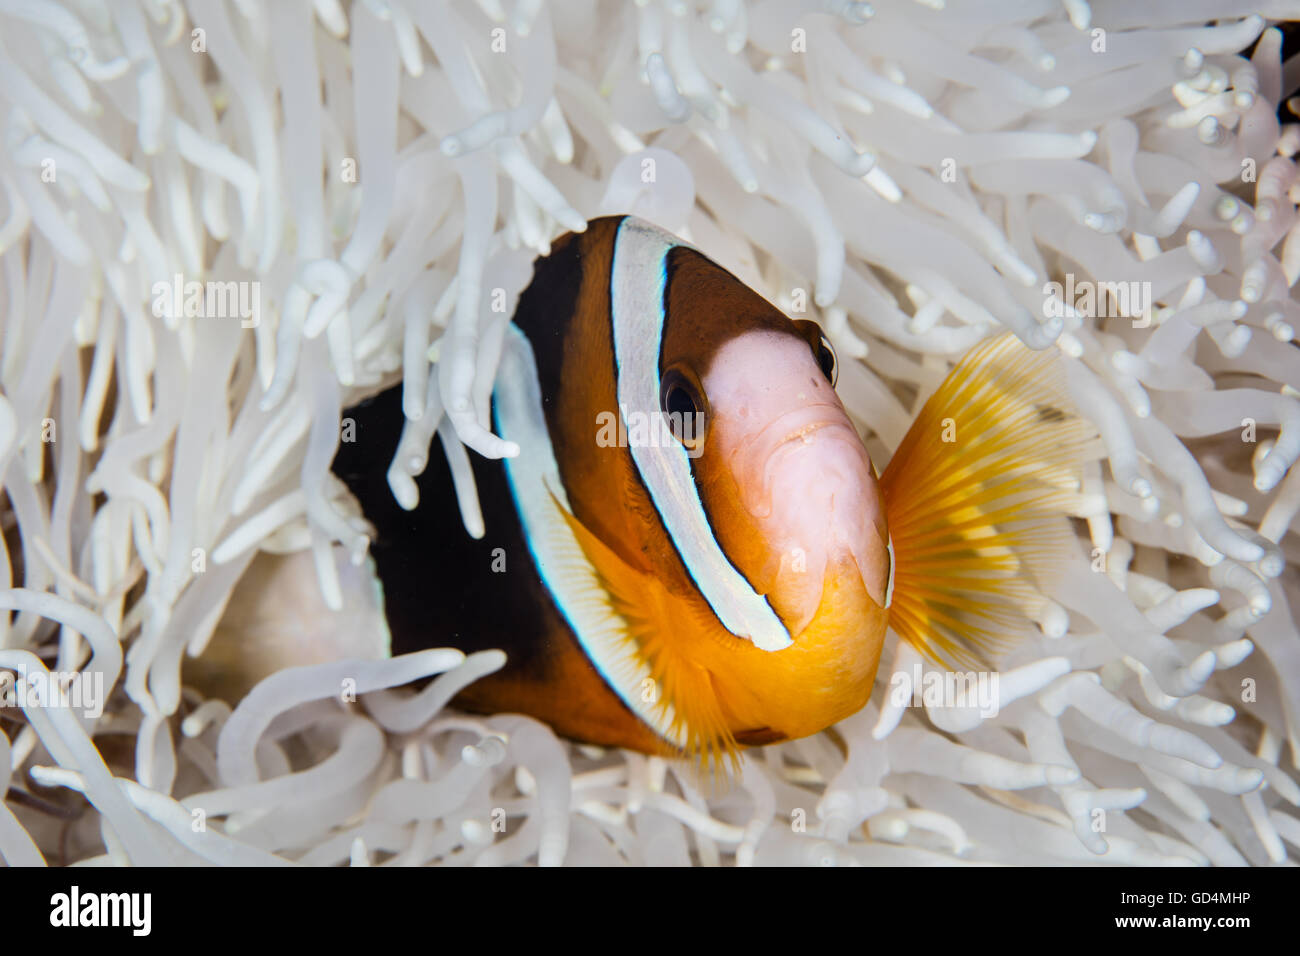 A Clark's anemonefish (Amphiprion clarkii) swims among the bleached tentacles of its host anemone on a coral reef in Indonesia. Stock Photo